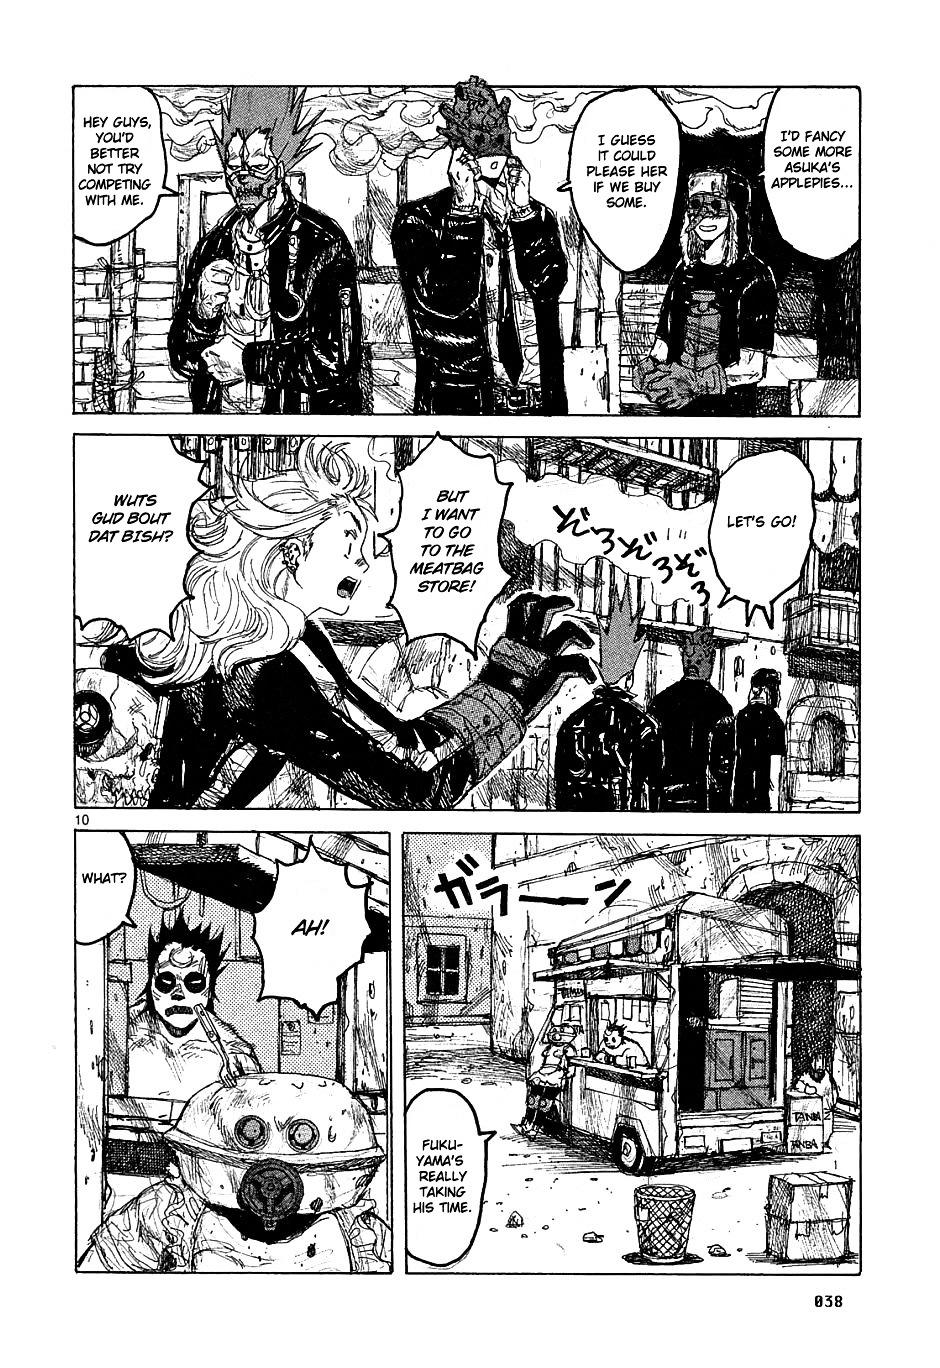 Dorohedoro Chapter 38 : Meatbags Free For All page 10 - Mangakakalot